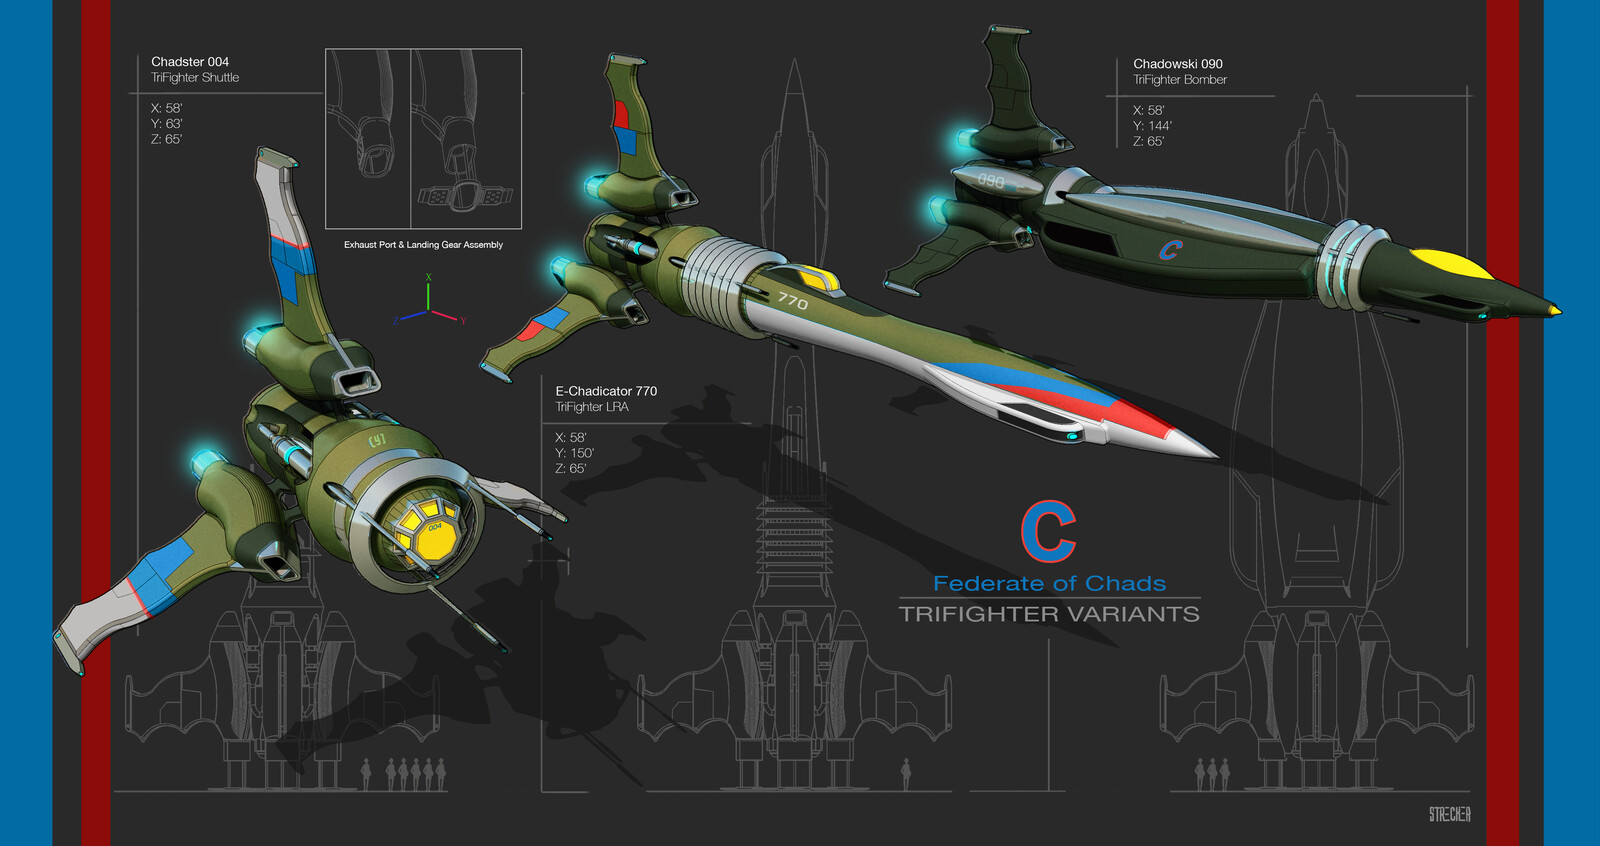 Modular multi-role space fighters from the Federate of Chads